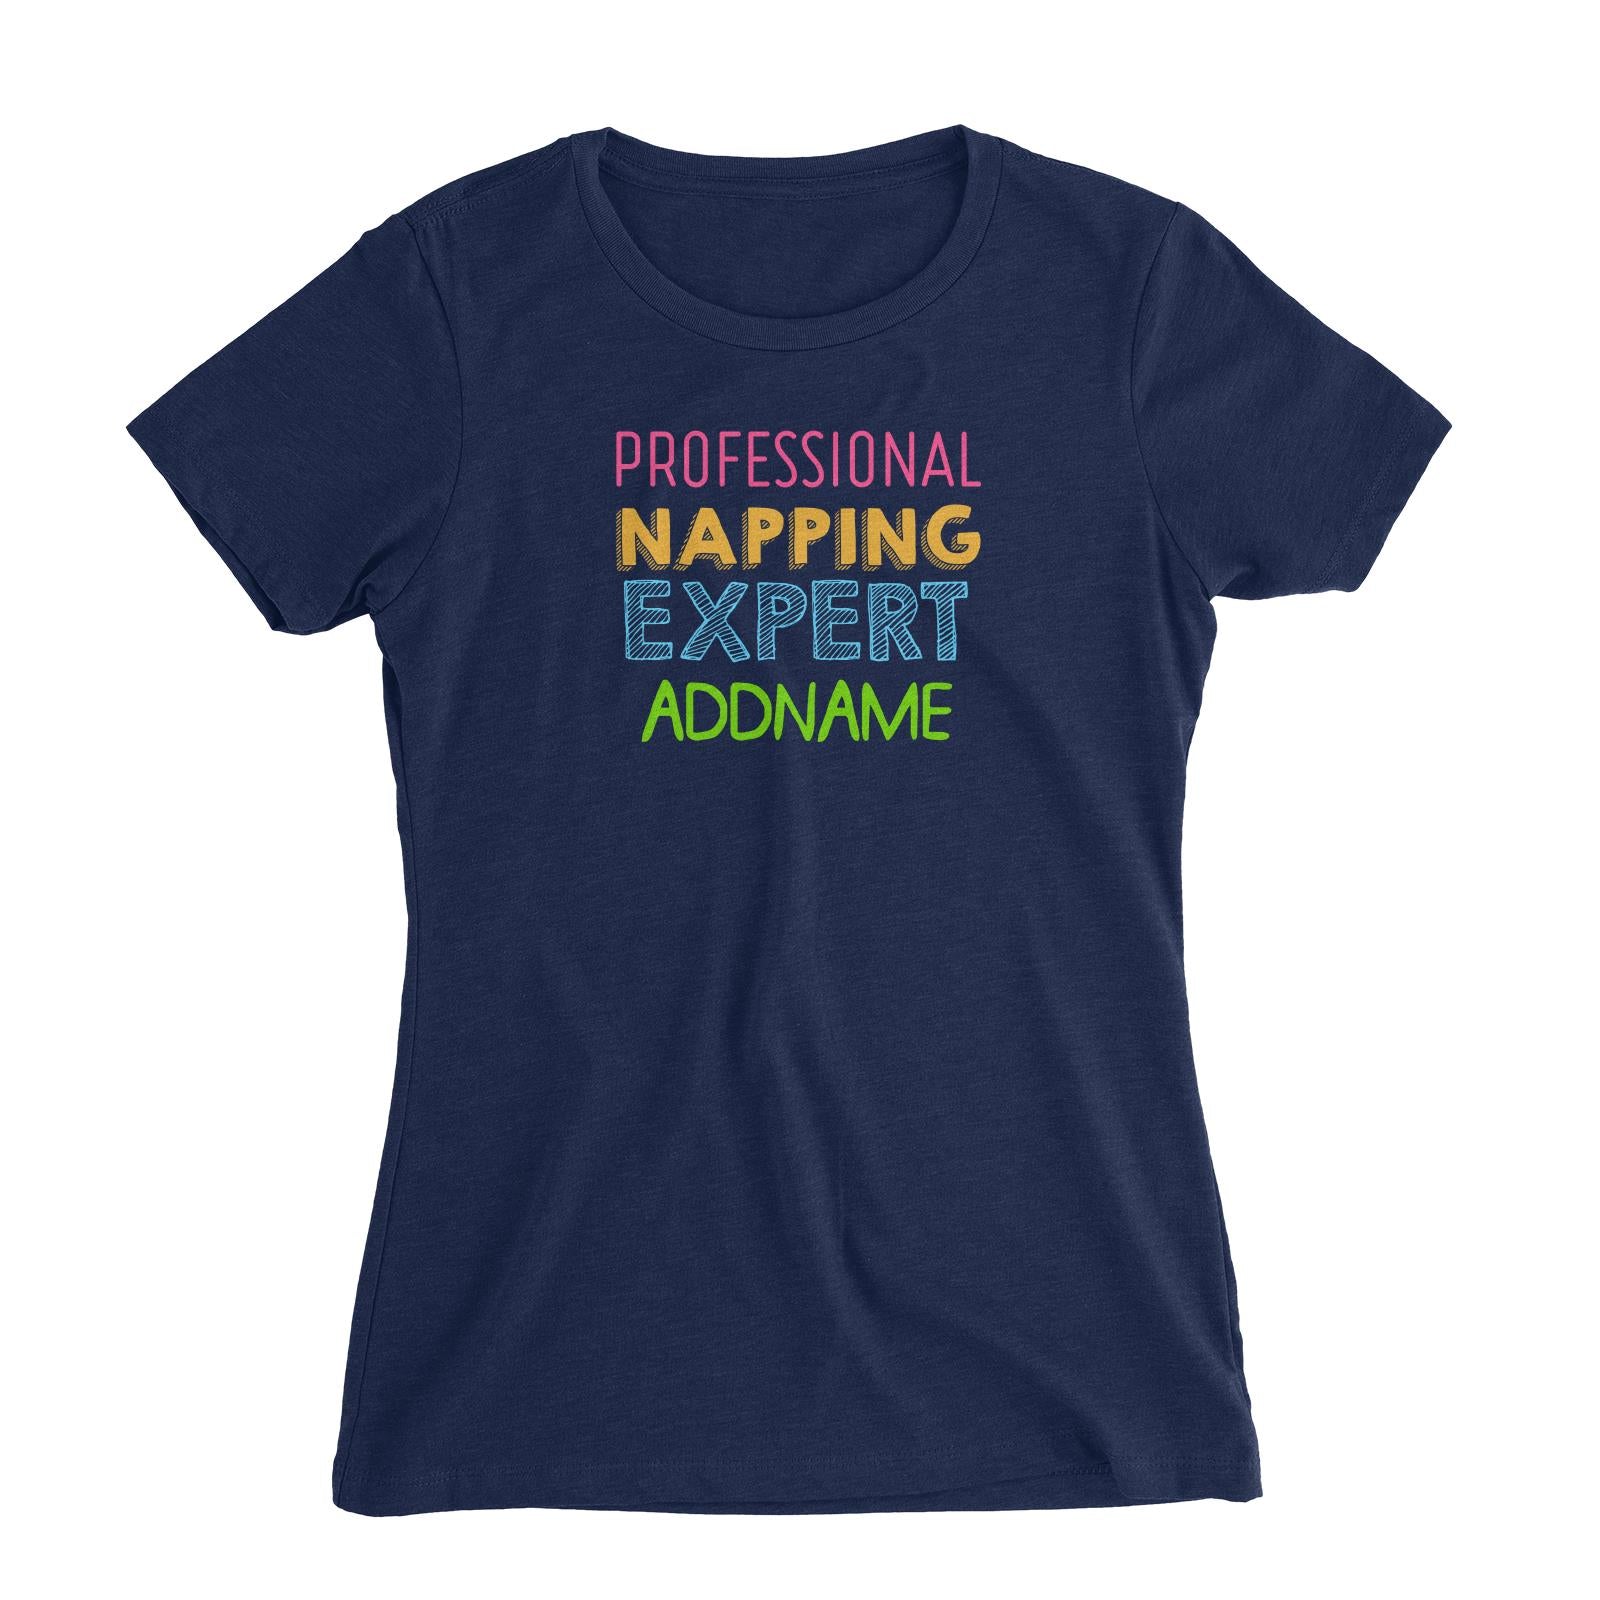 Professional Napping Expert Addname Women's Slim Fit T-Shirt